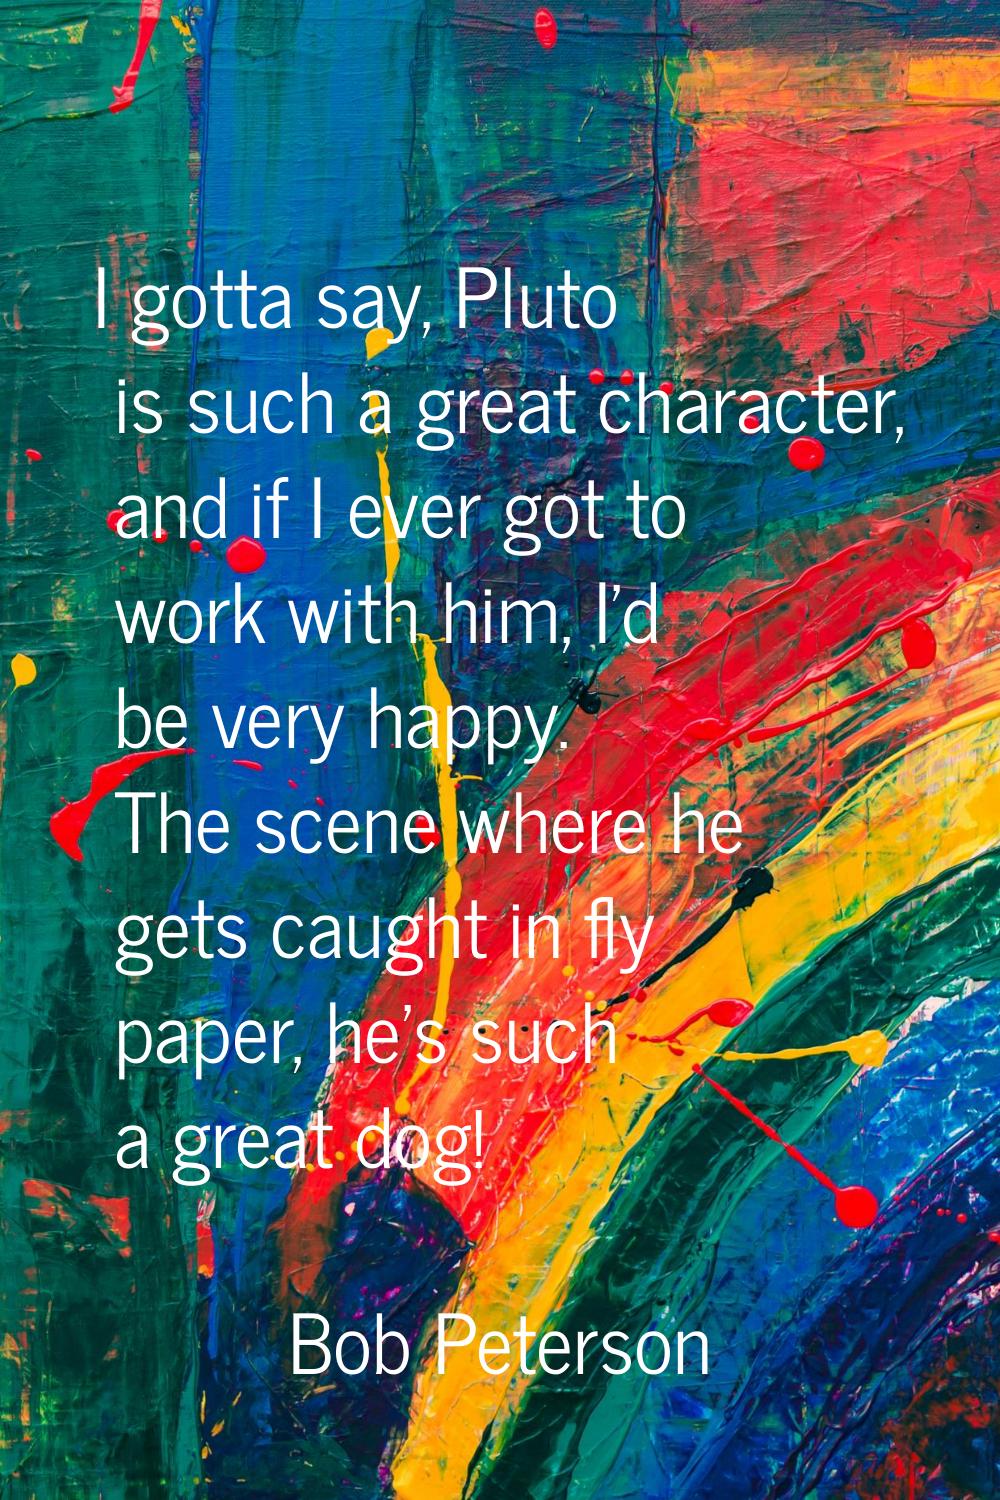 I gotta say, Pluto is such a great character, and if I ever got to work with him, I'd be very happy